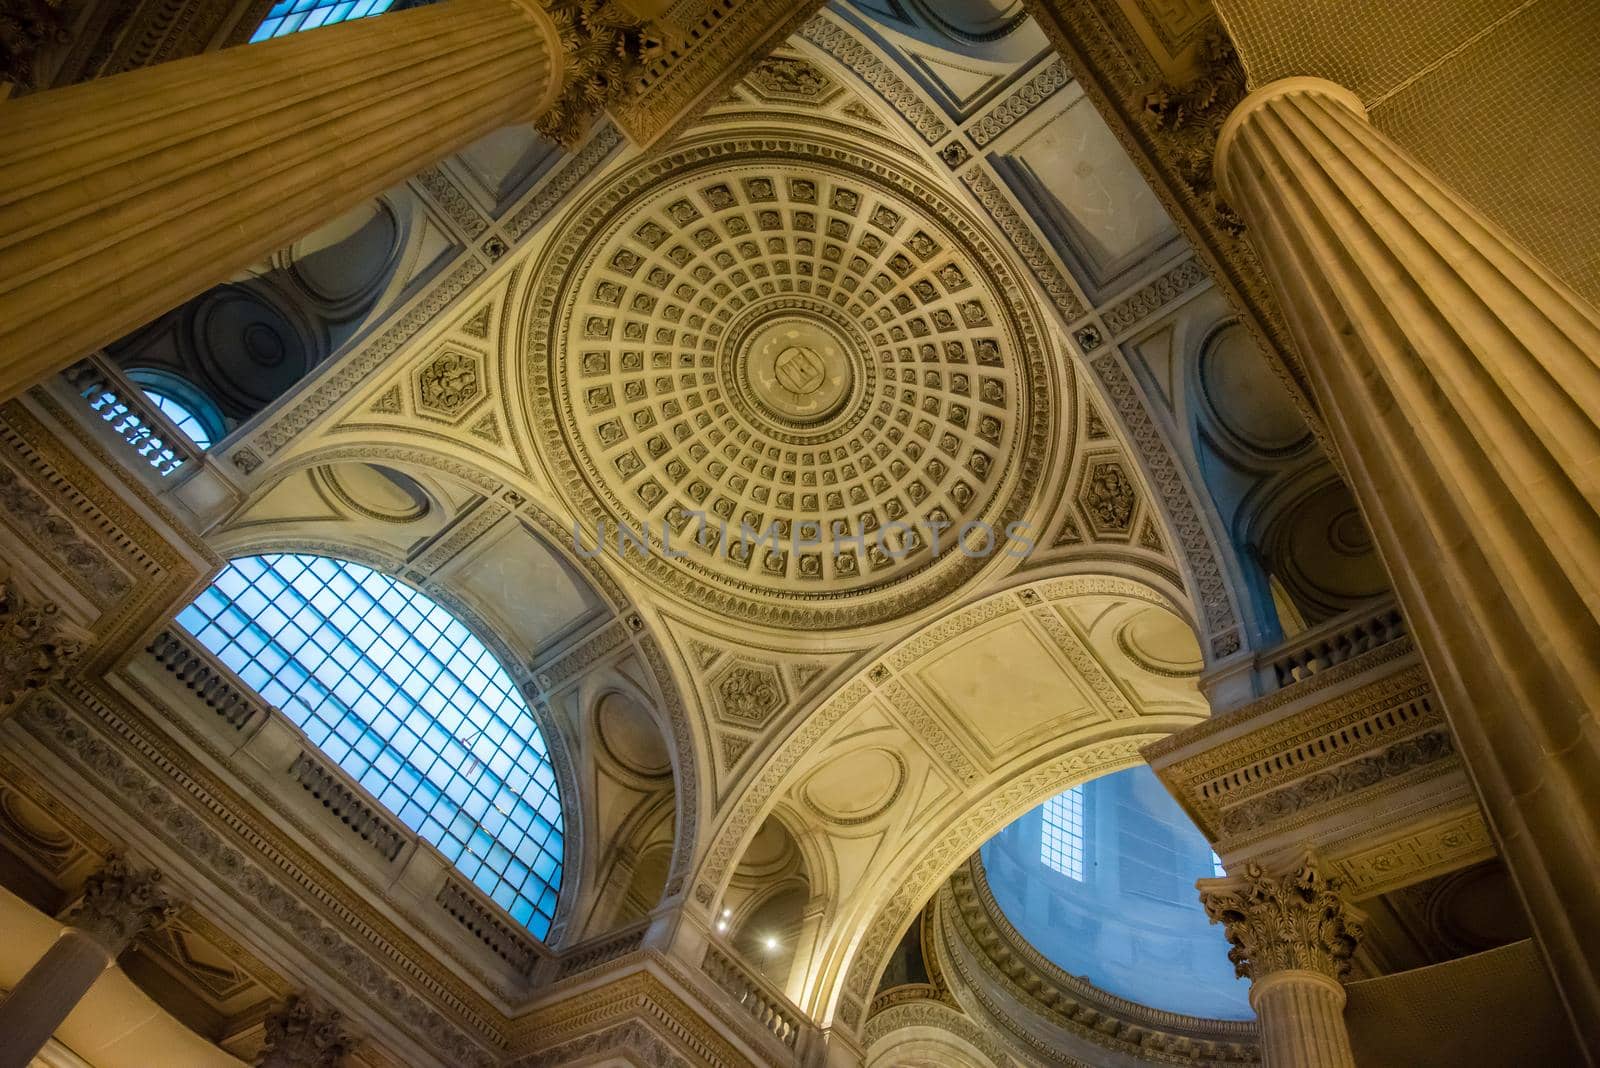 Paris, France - February 3, 2017: Gorgeous interior dome structure in a Paris museum. Looking up